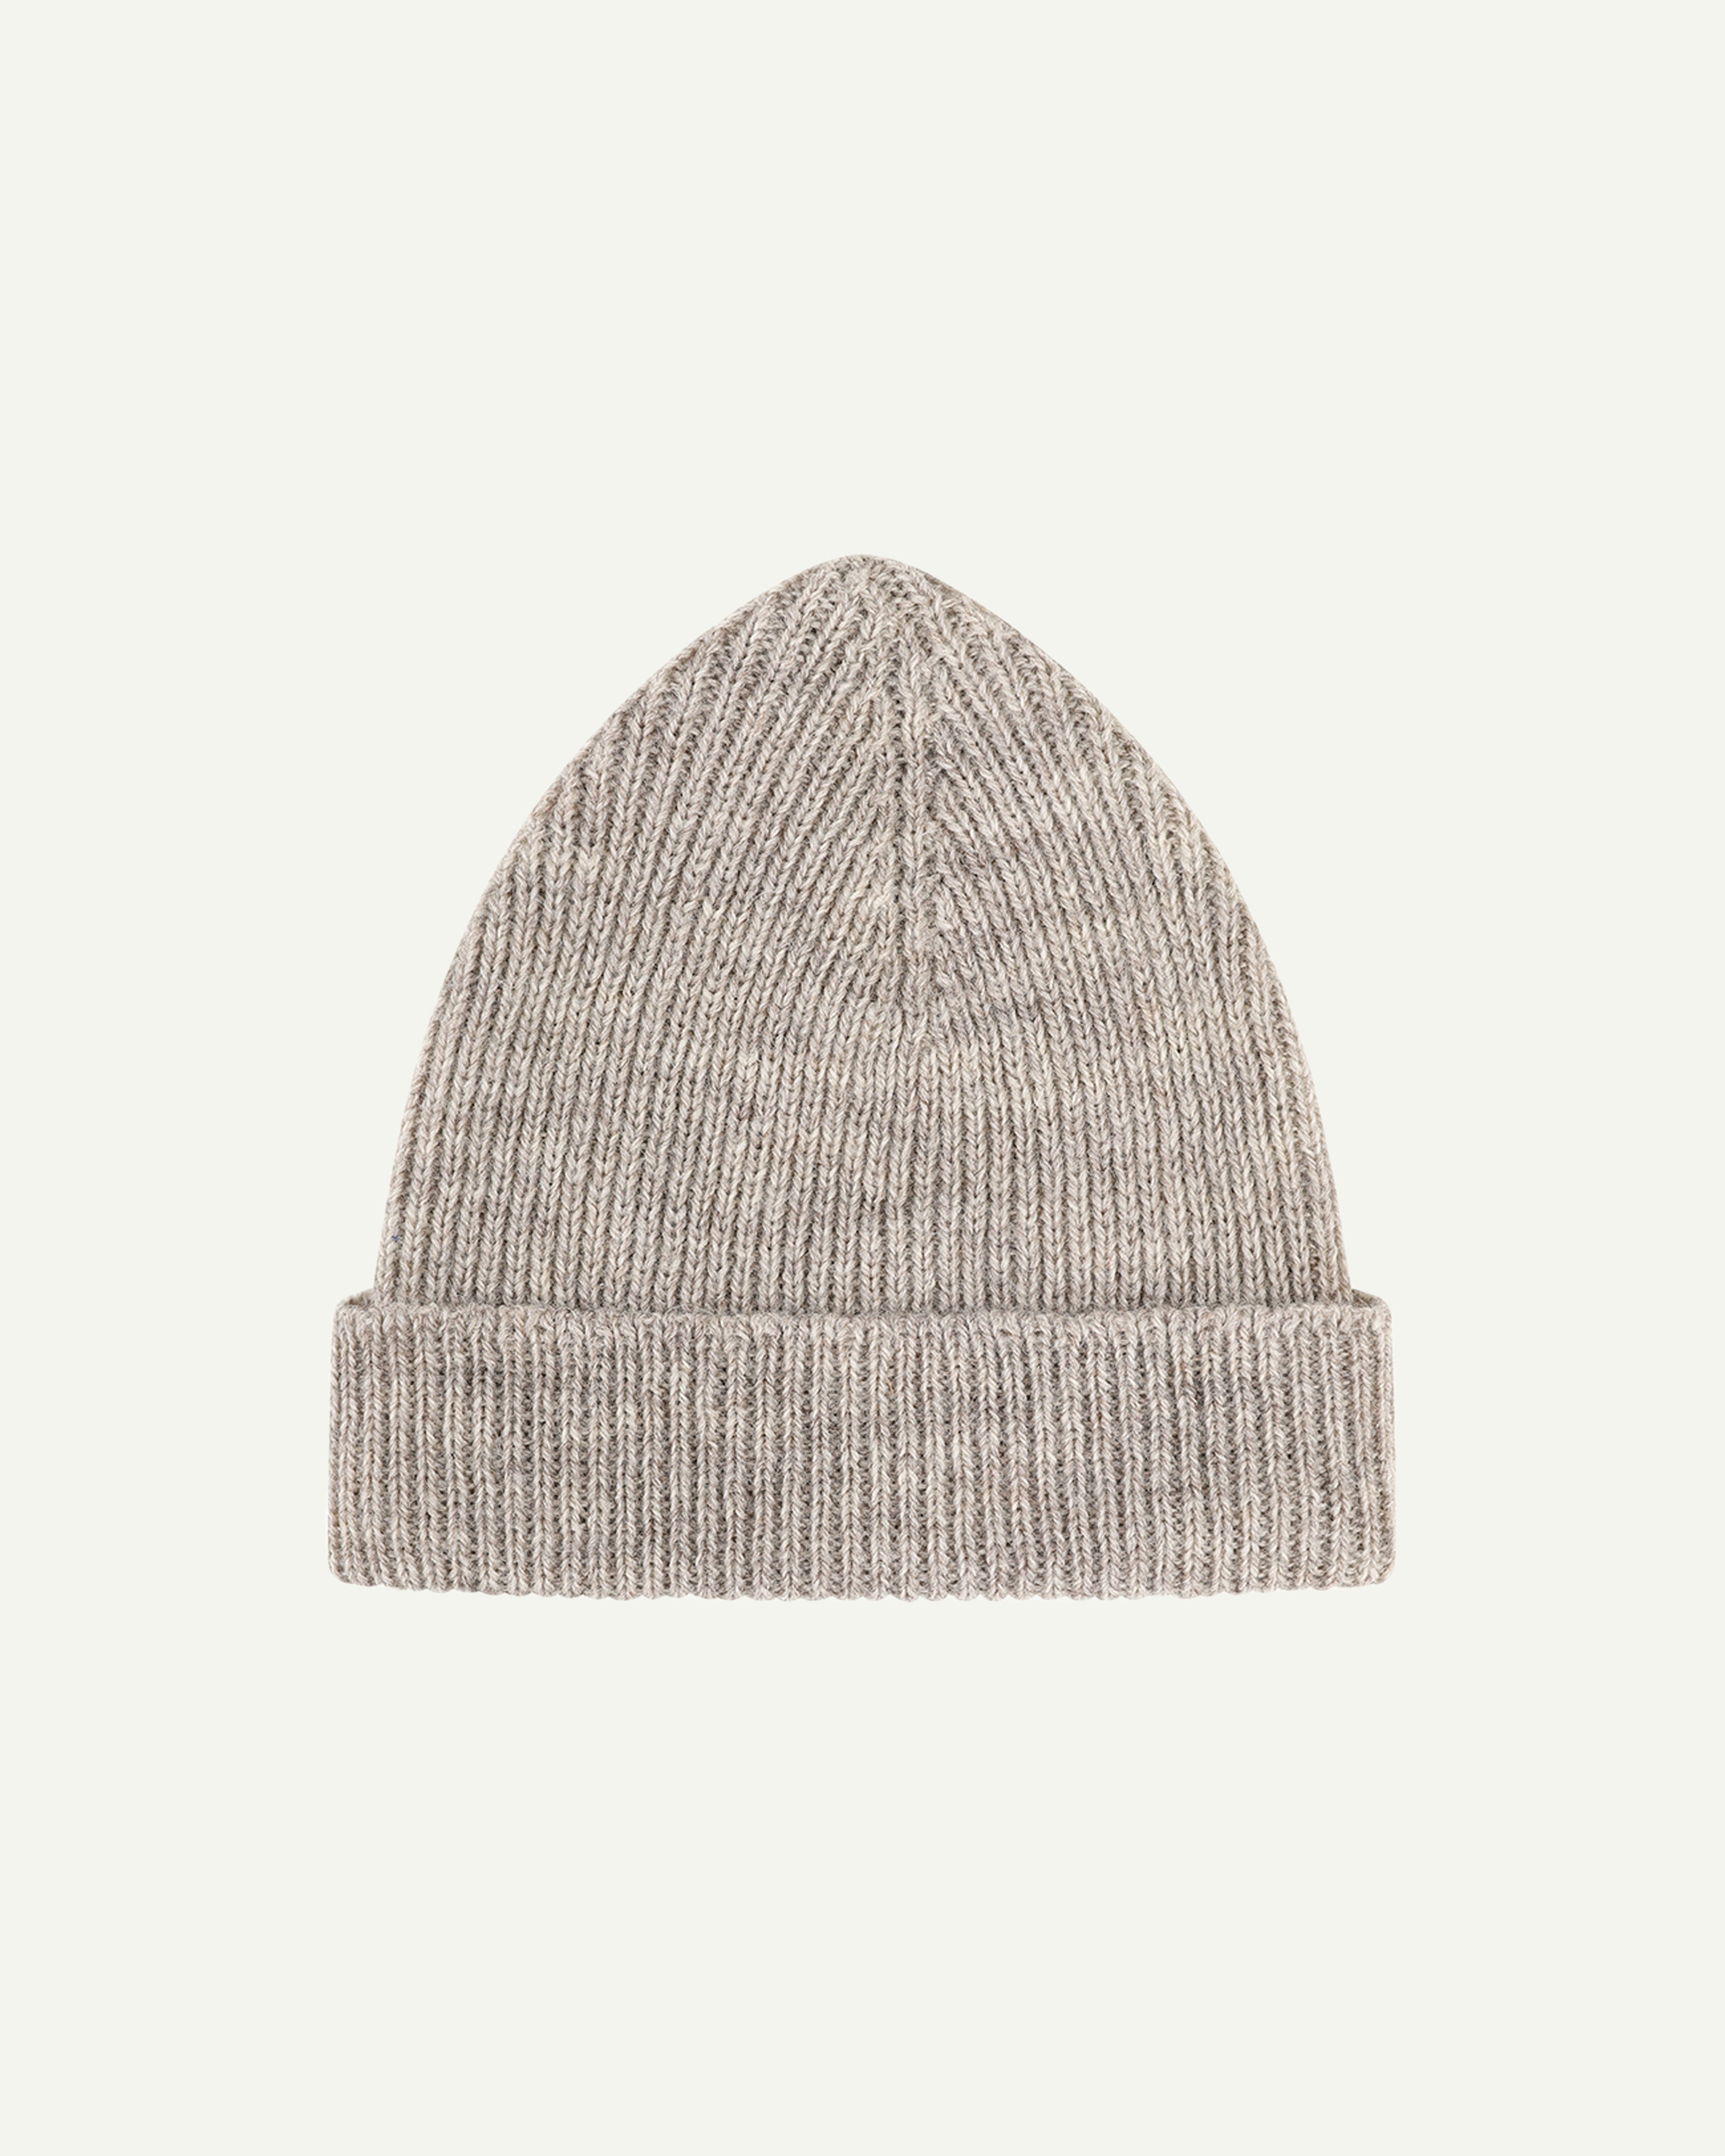 Flat view of Uskees 4005 undyed 'oat' soft beige coloured wool hat, with clear view of adjustable cuff.